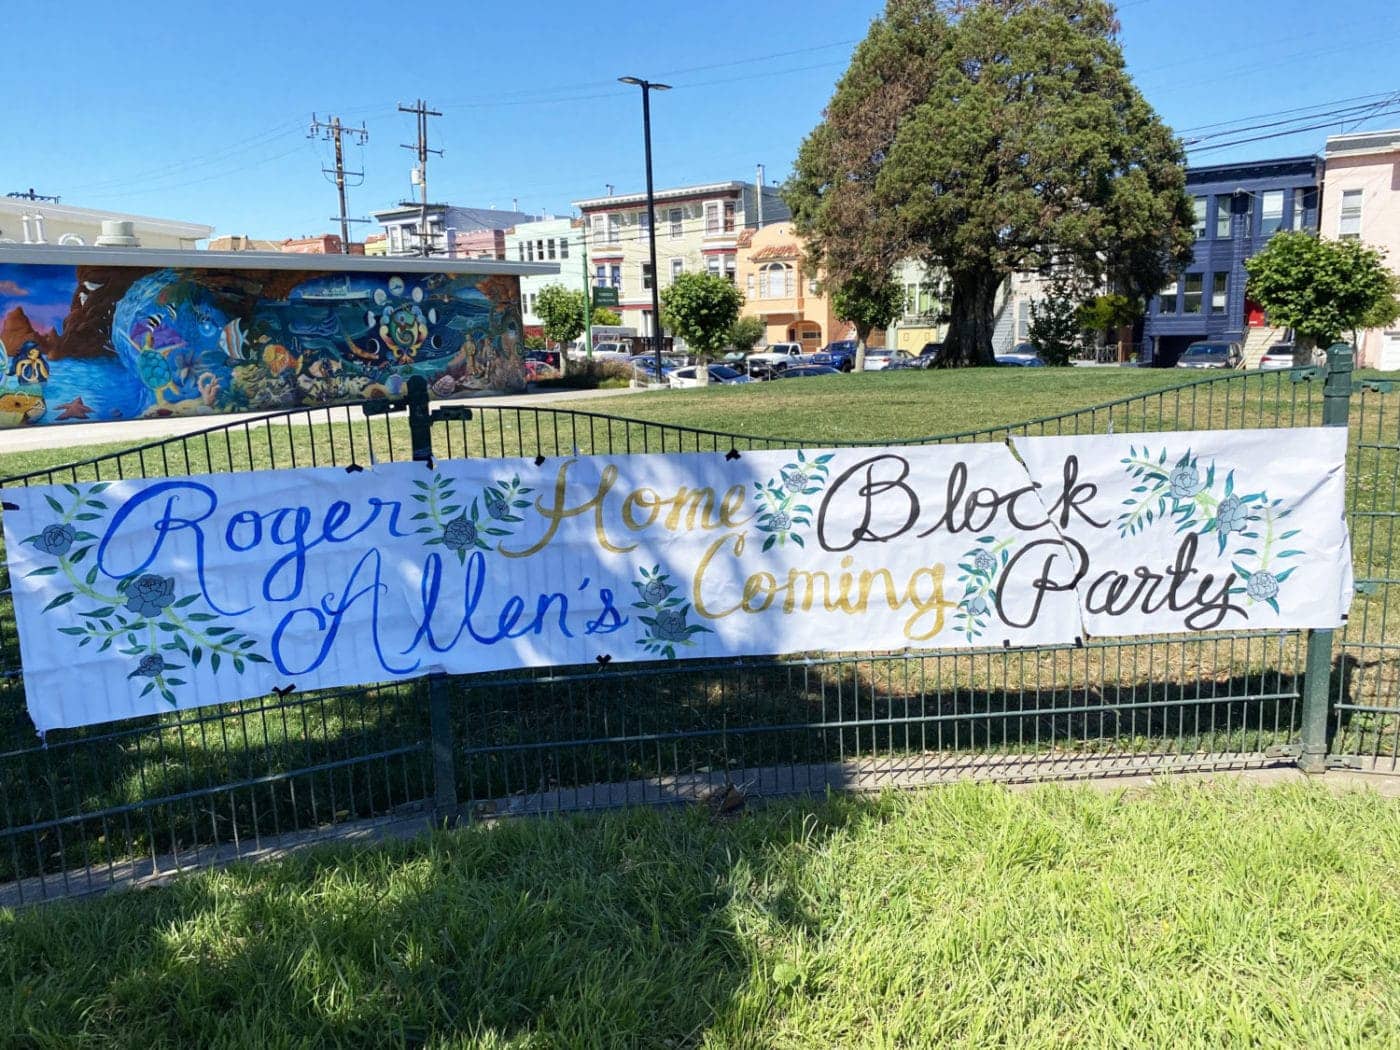 Roger-Allen-Home-Coming-Block-Party-062421-1400x1050, Killed for being Black while changing a tire in Daly City: The poLice murder of Roger Allen, Local News & Views 